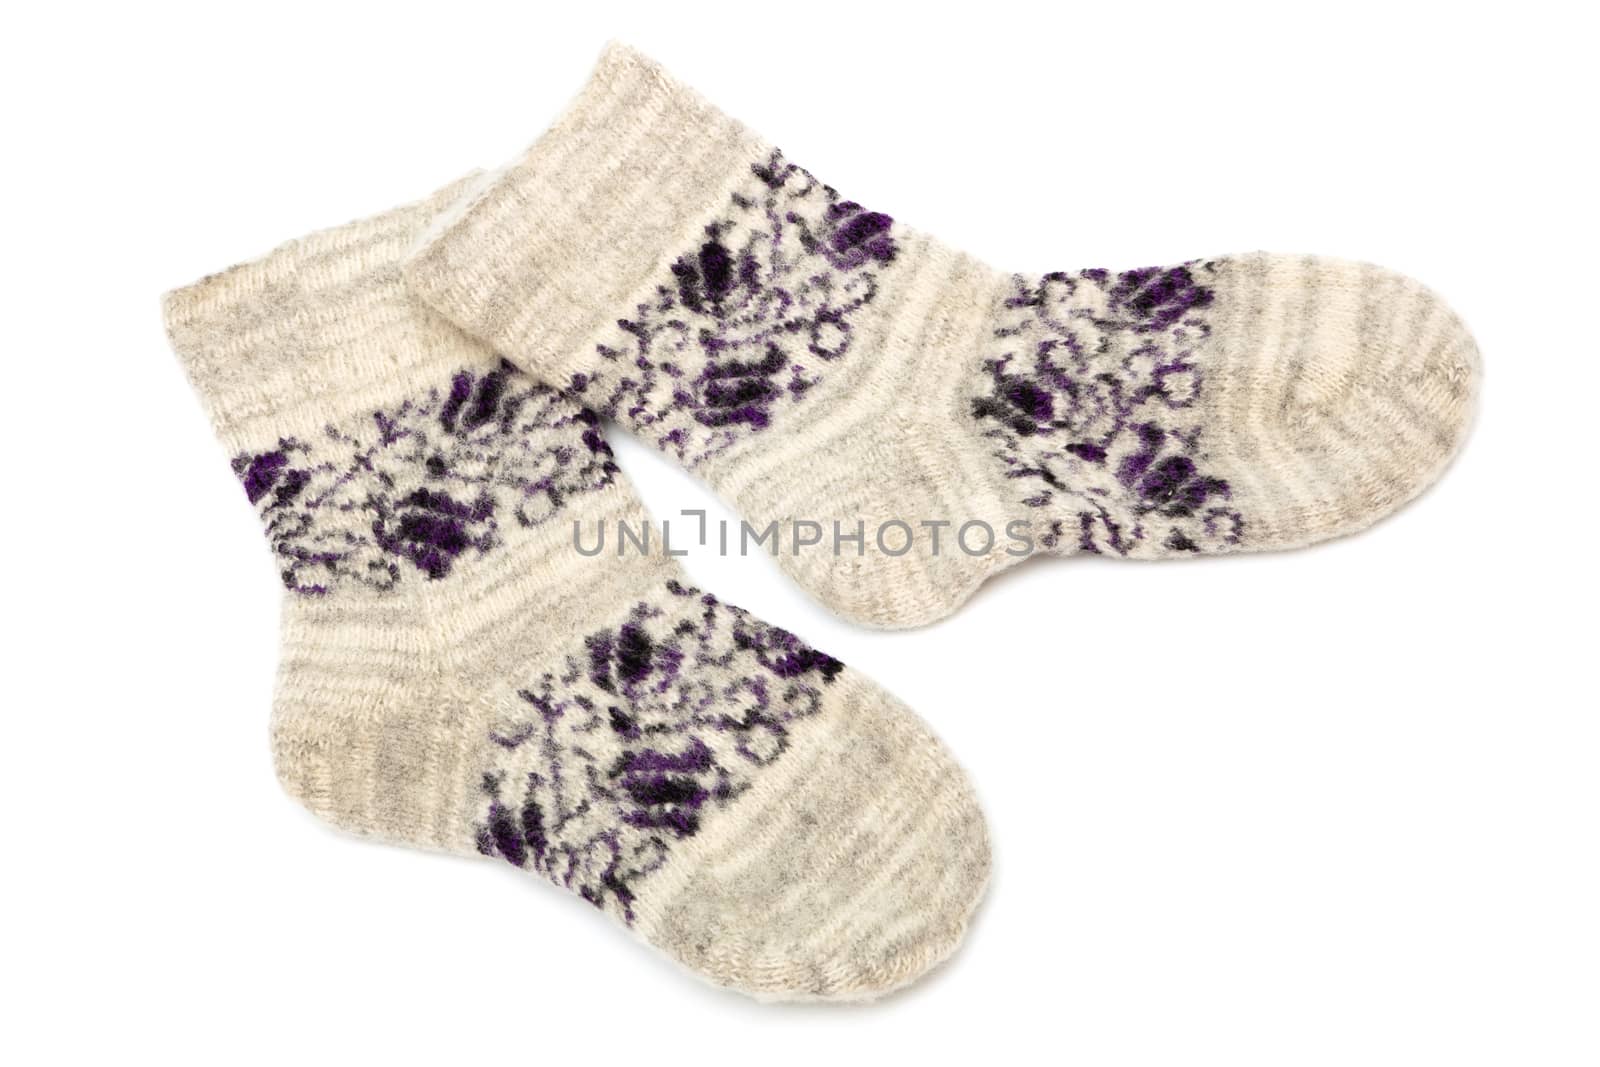 warm and beautiful socks on a white background